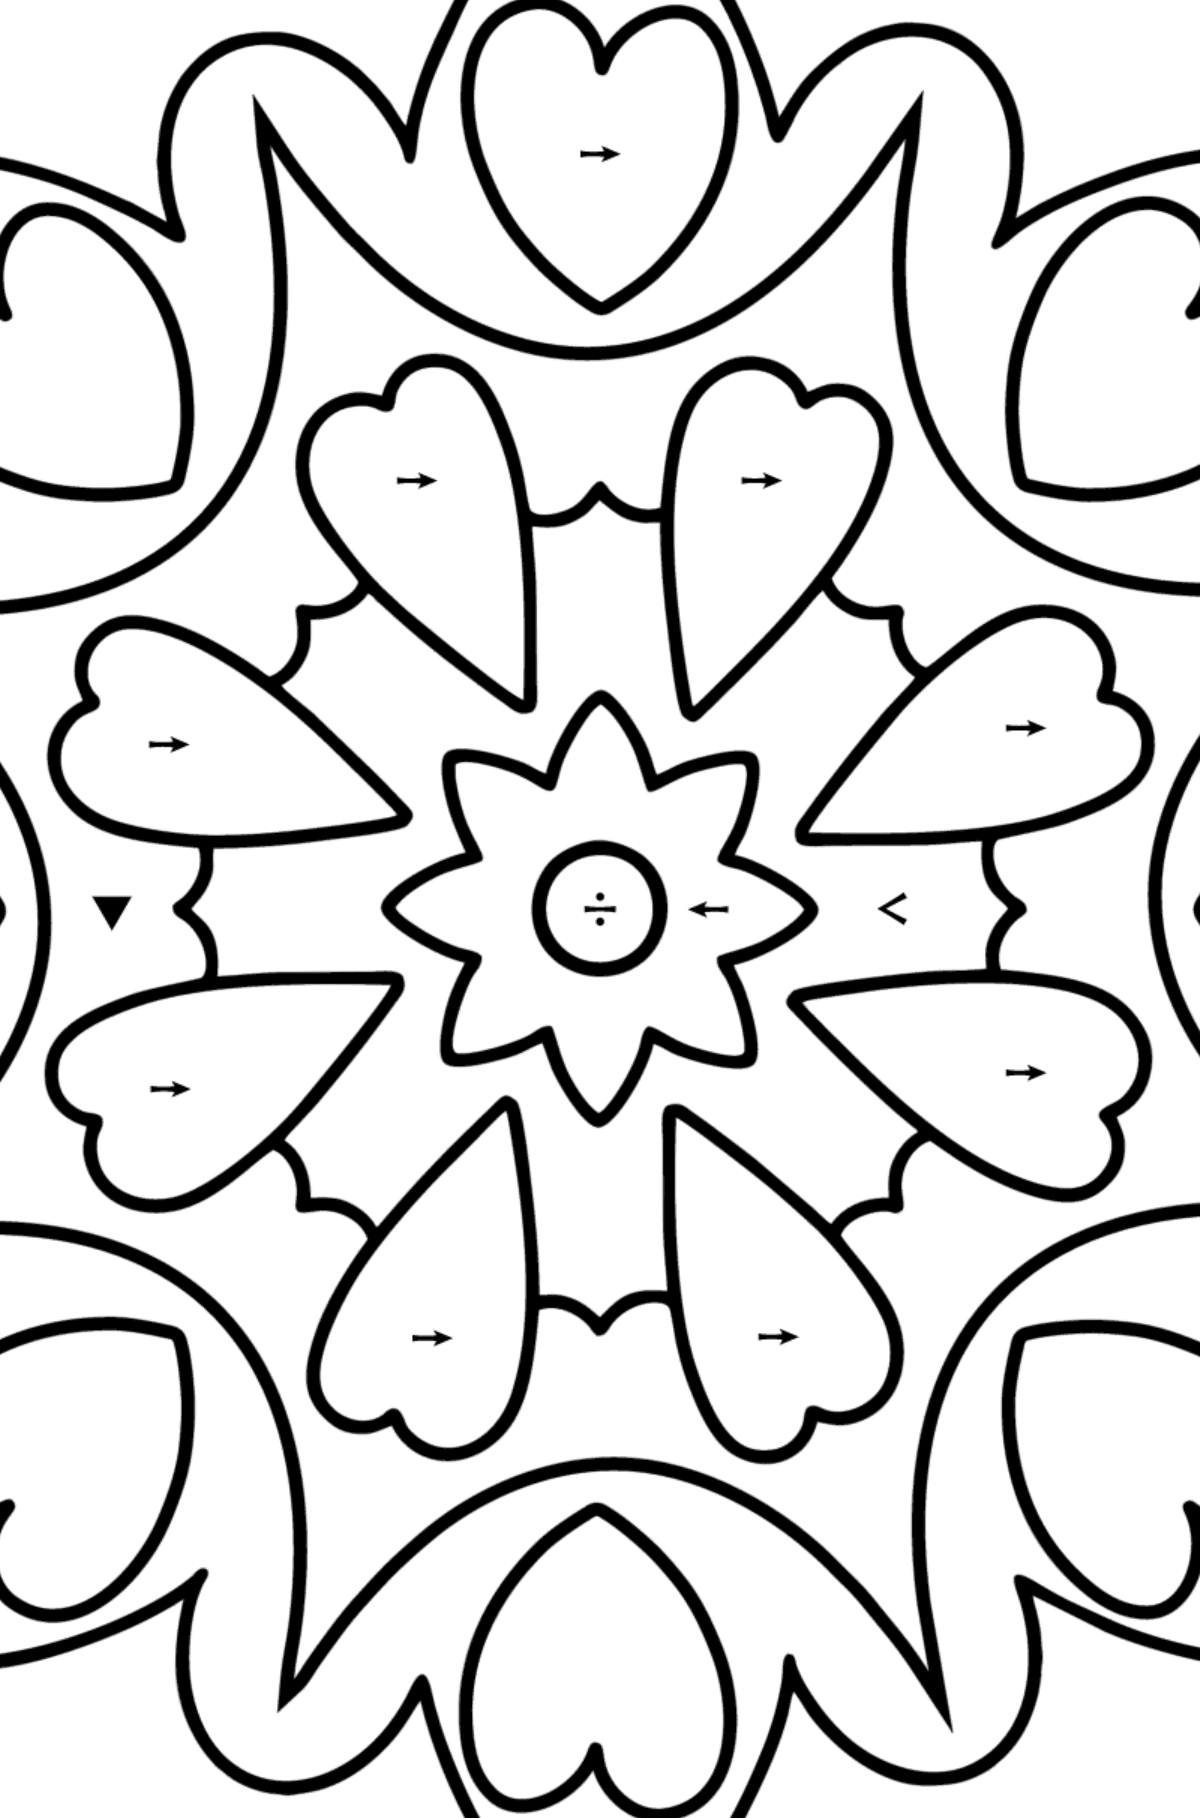 Mandala coloring page - 21 elements - Coloring by Symbols for Kids